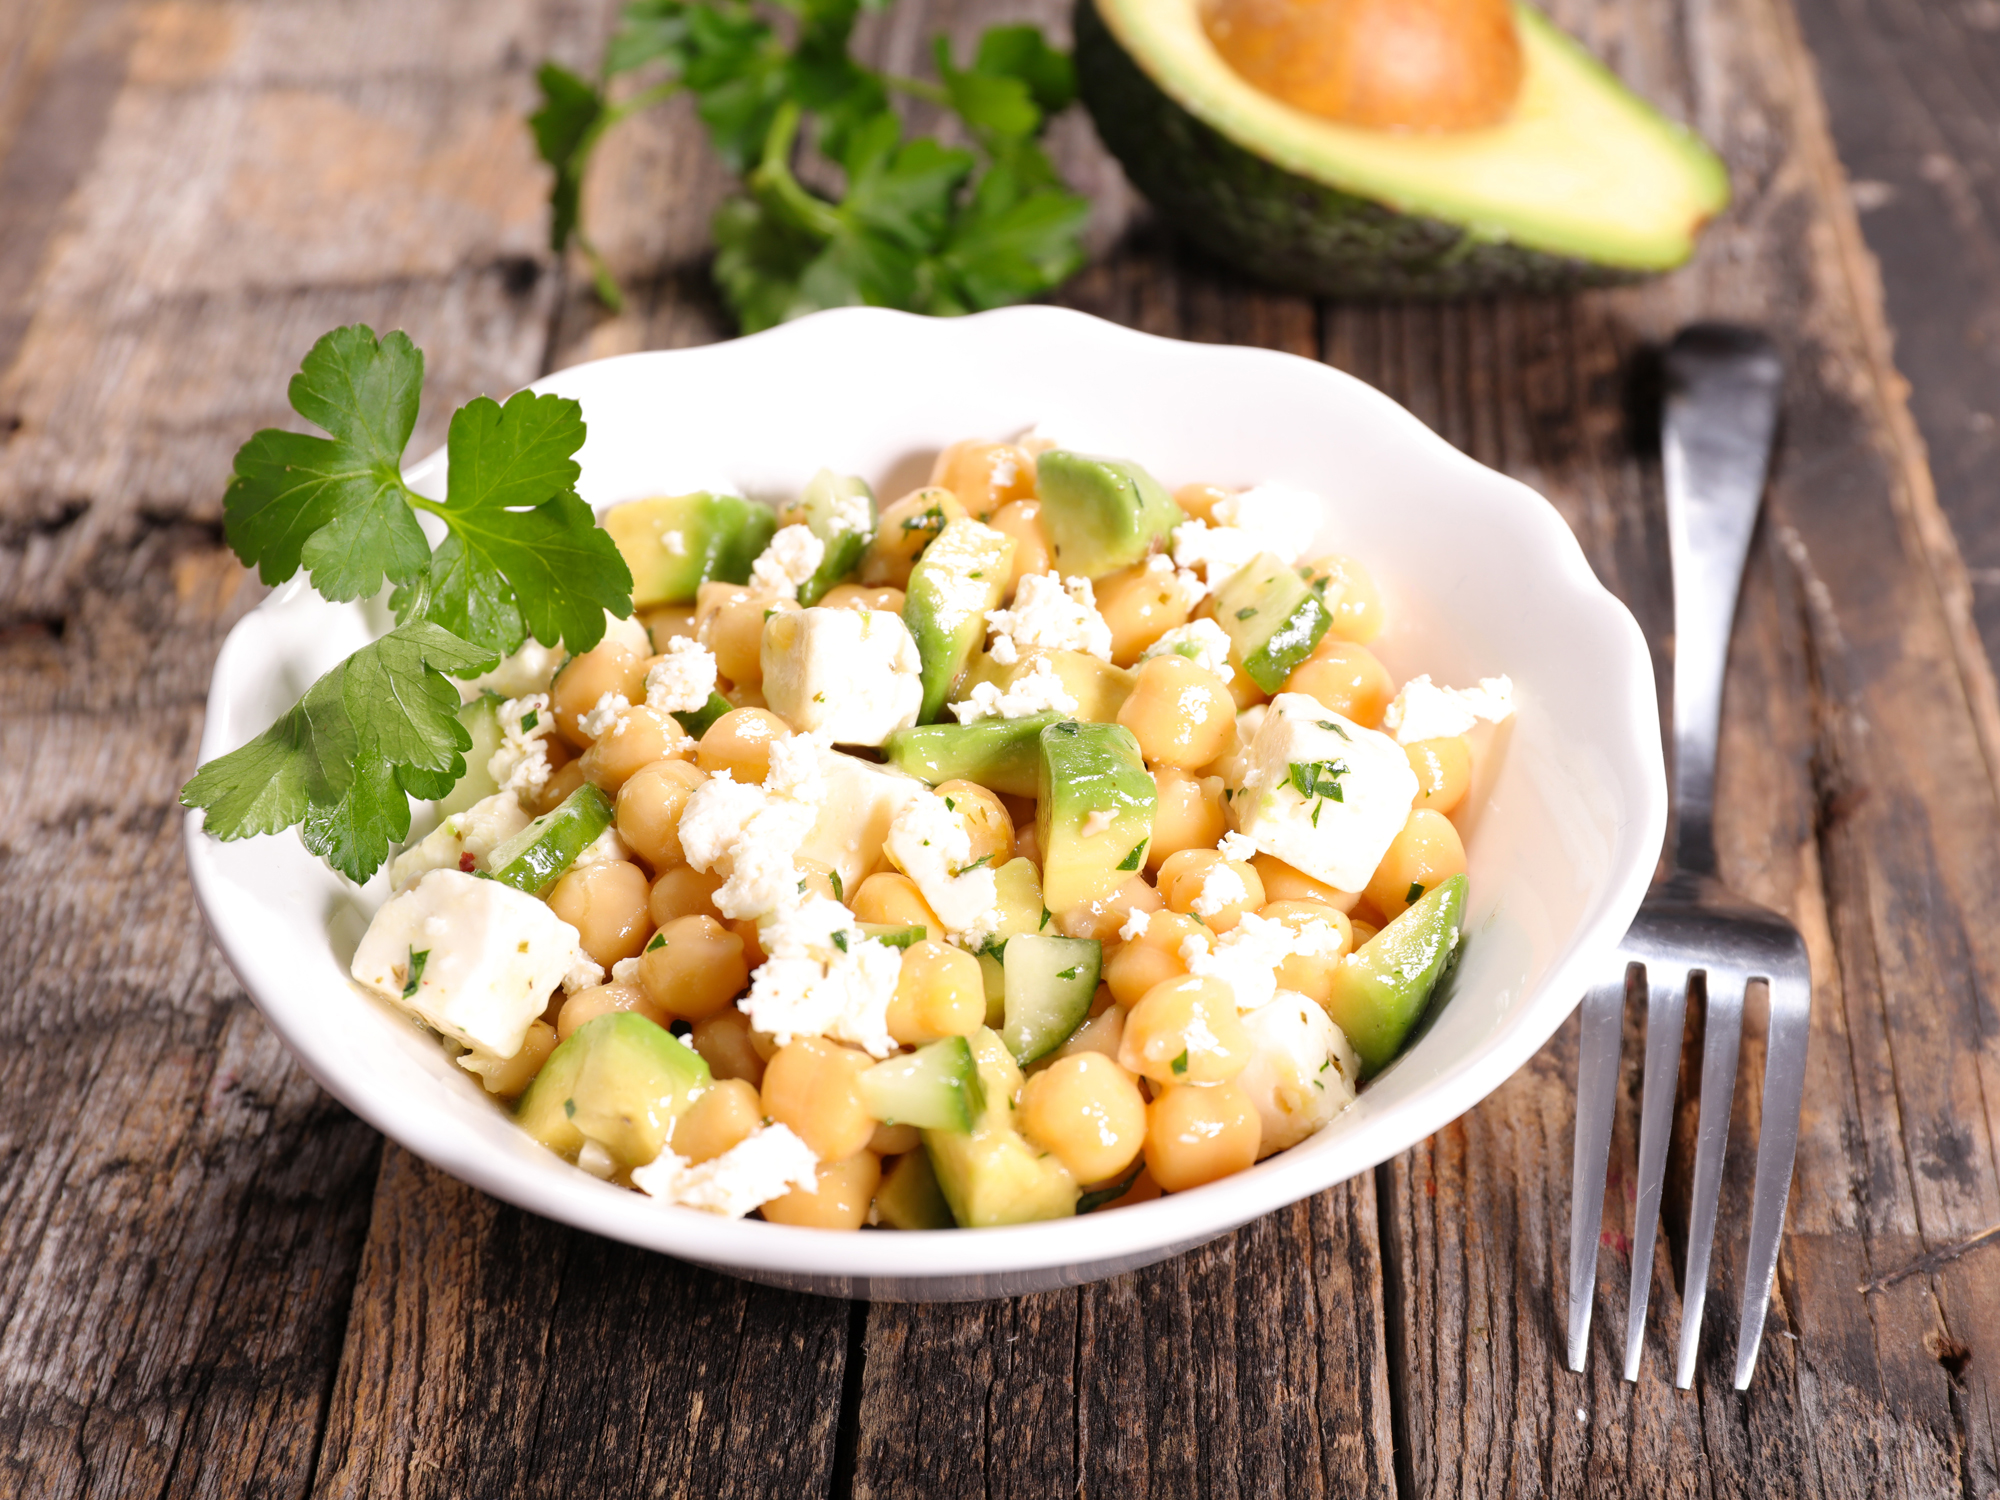 In the kitchen with Kelley: Chickpea, avocado and feta salad